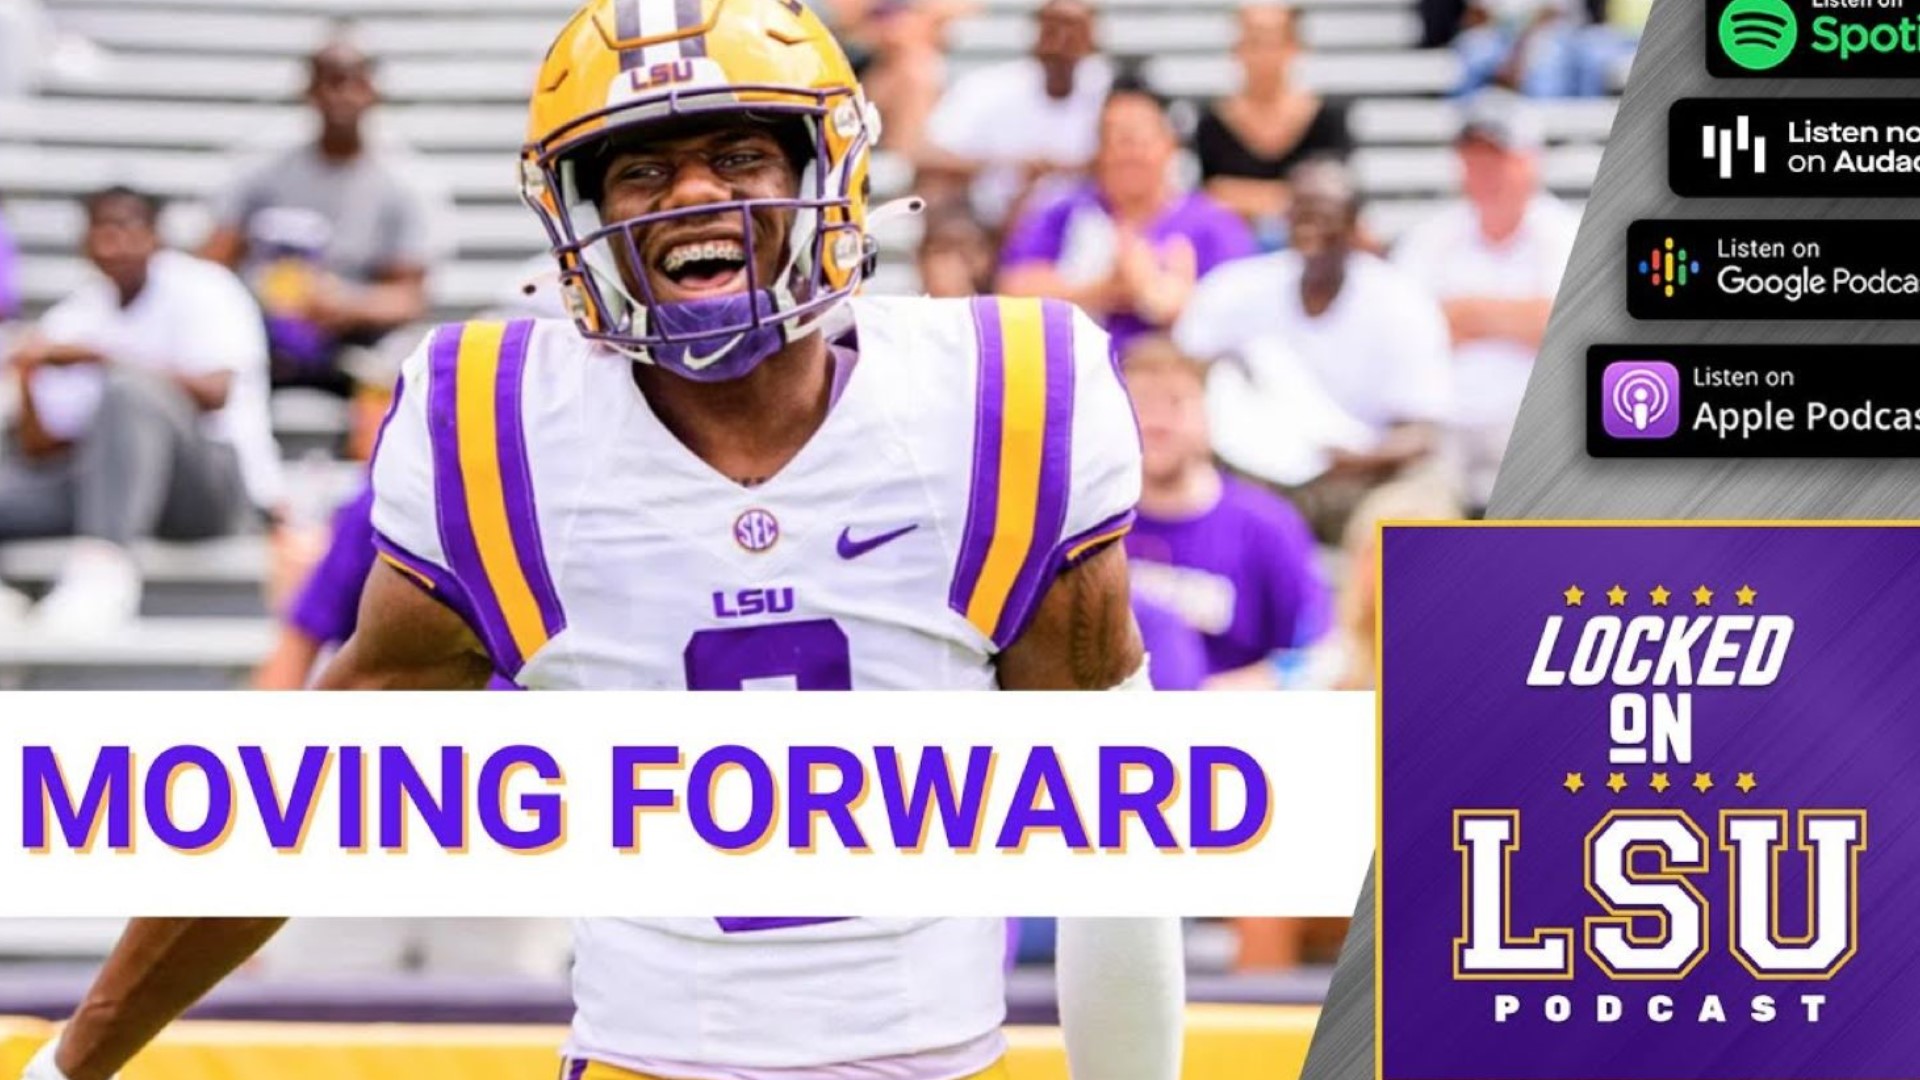 As a fairly young team, growing pains and learning curves are to be expected from the younger members of this LSU football team.